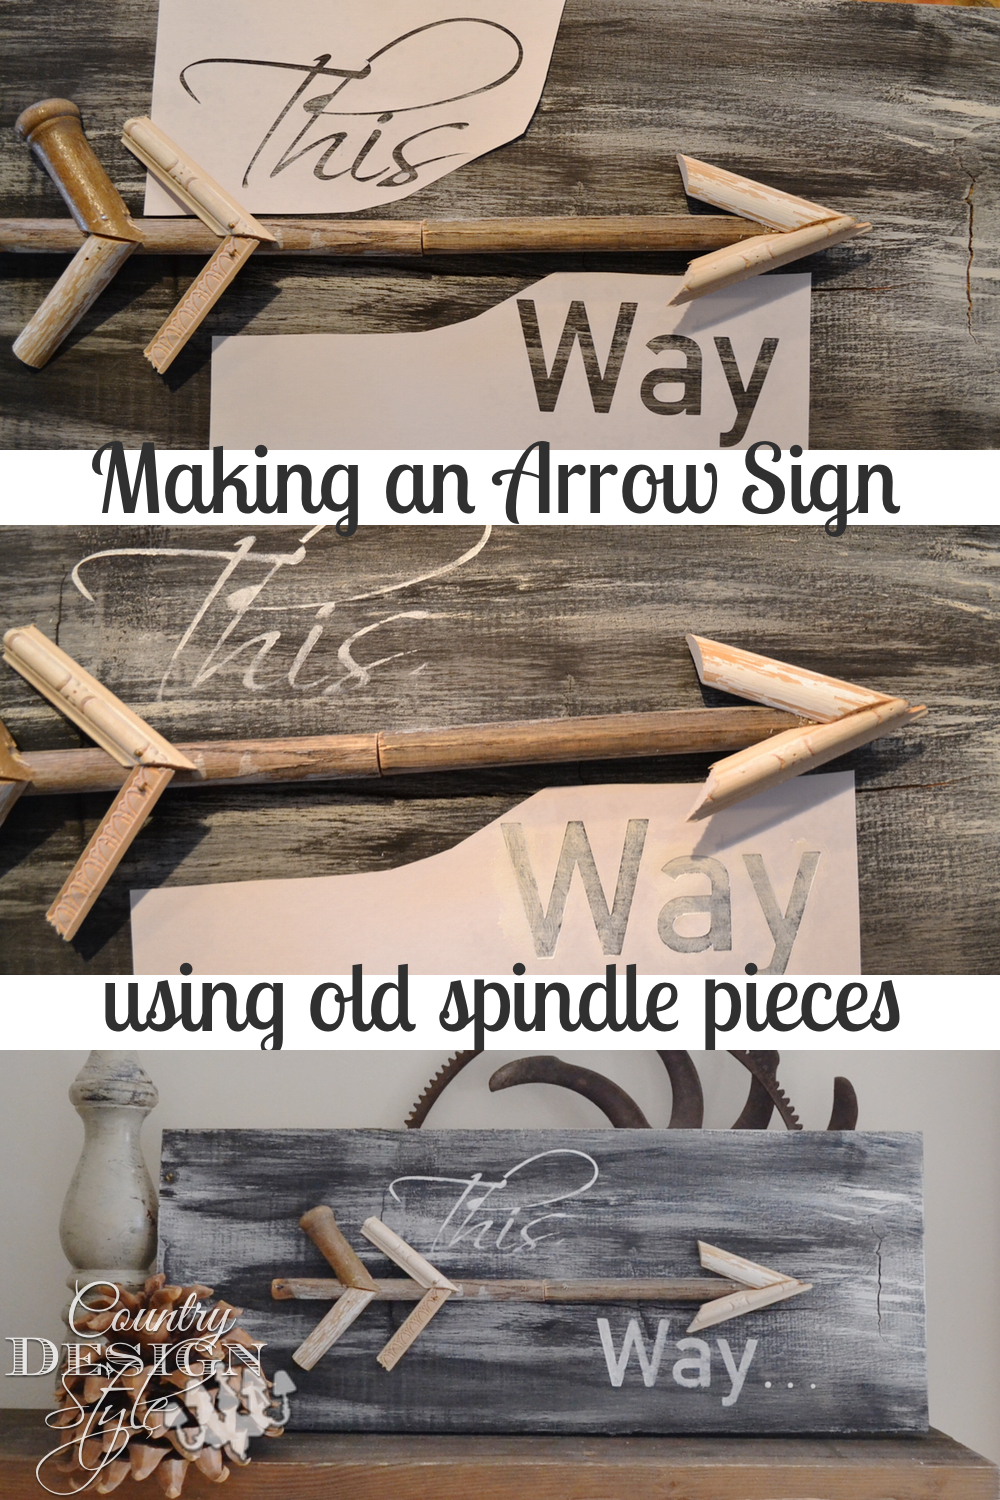 Making an Arrow Sign using old spindle pieces and stencils. Easy DIY project. Country Design Style